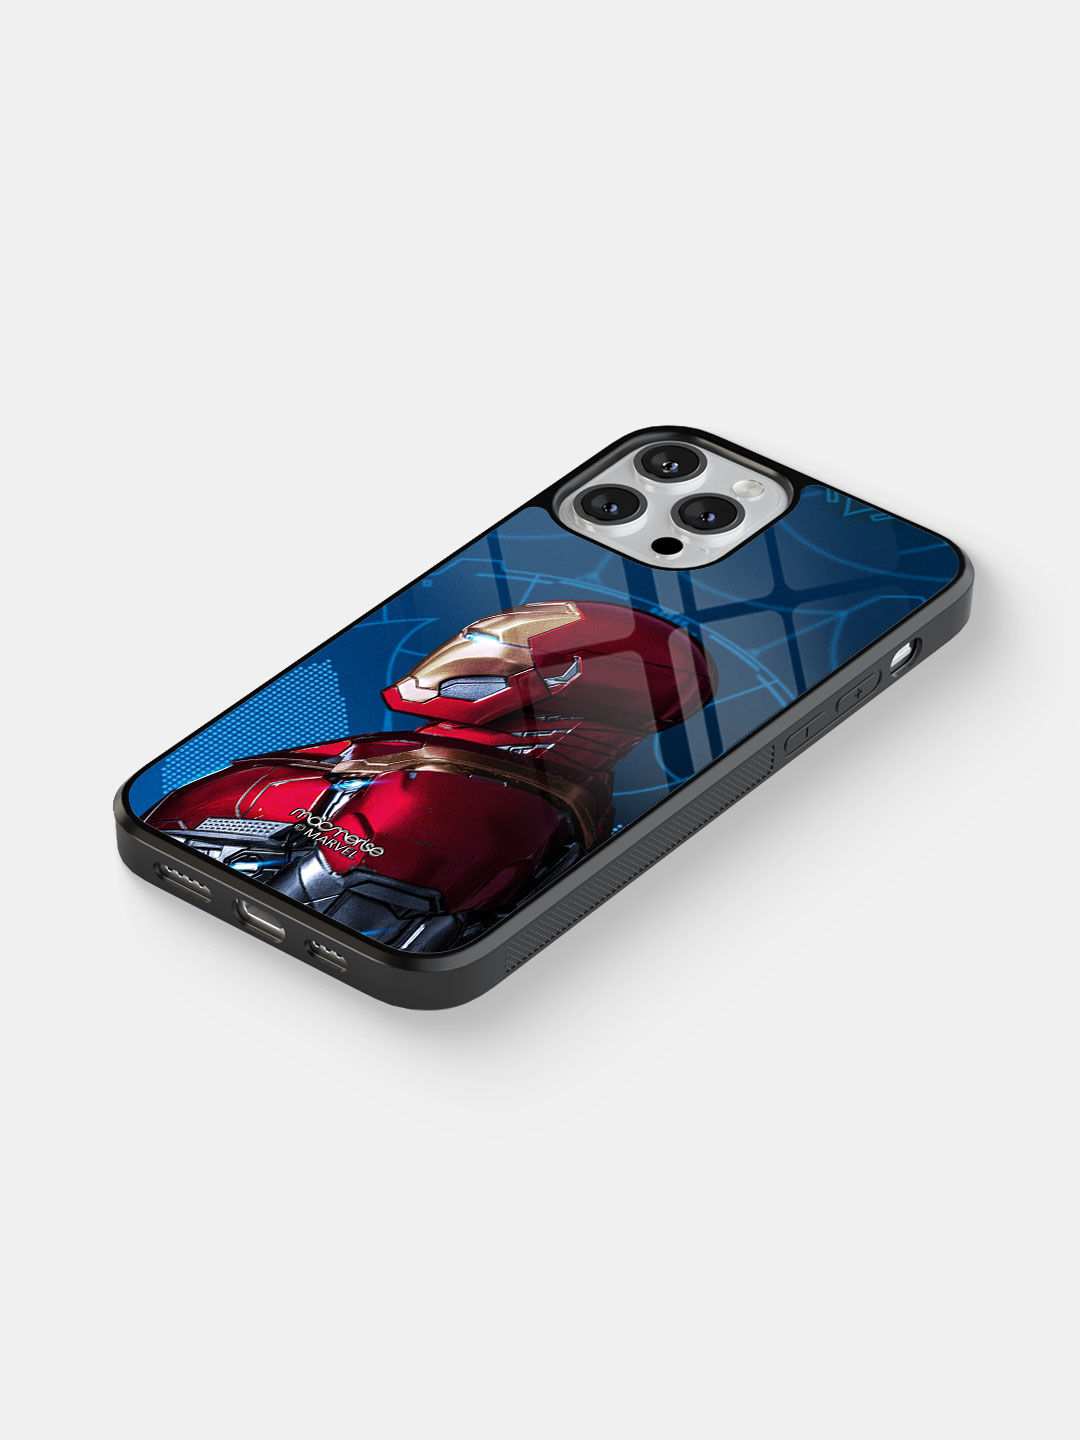 Iron Man side Armor - Glass Case For iPhone 13 Pro Max